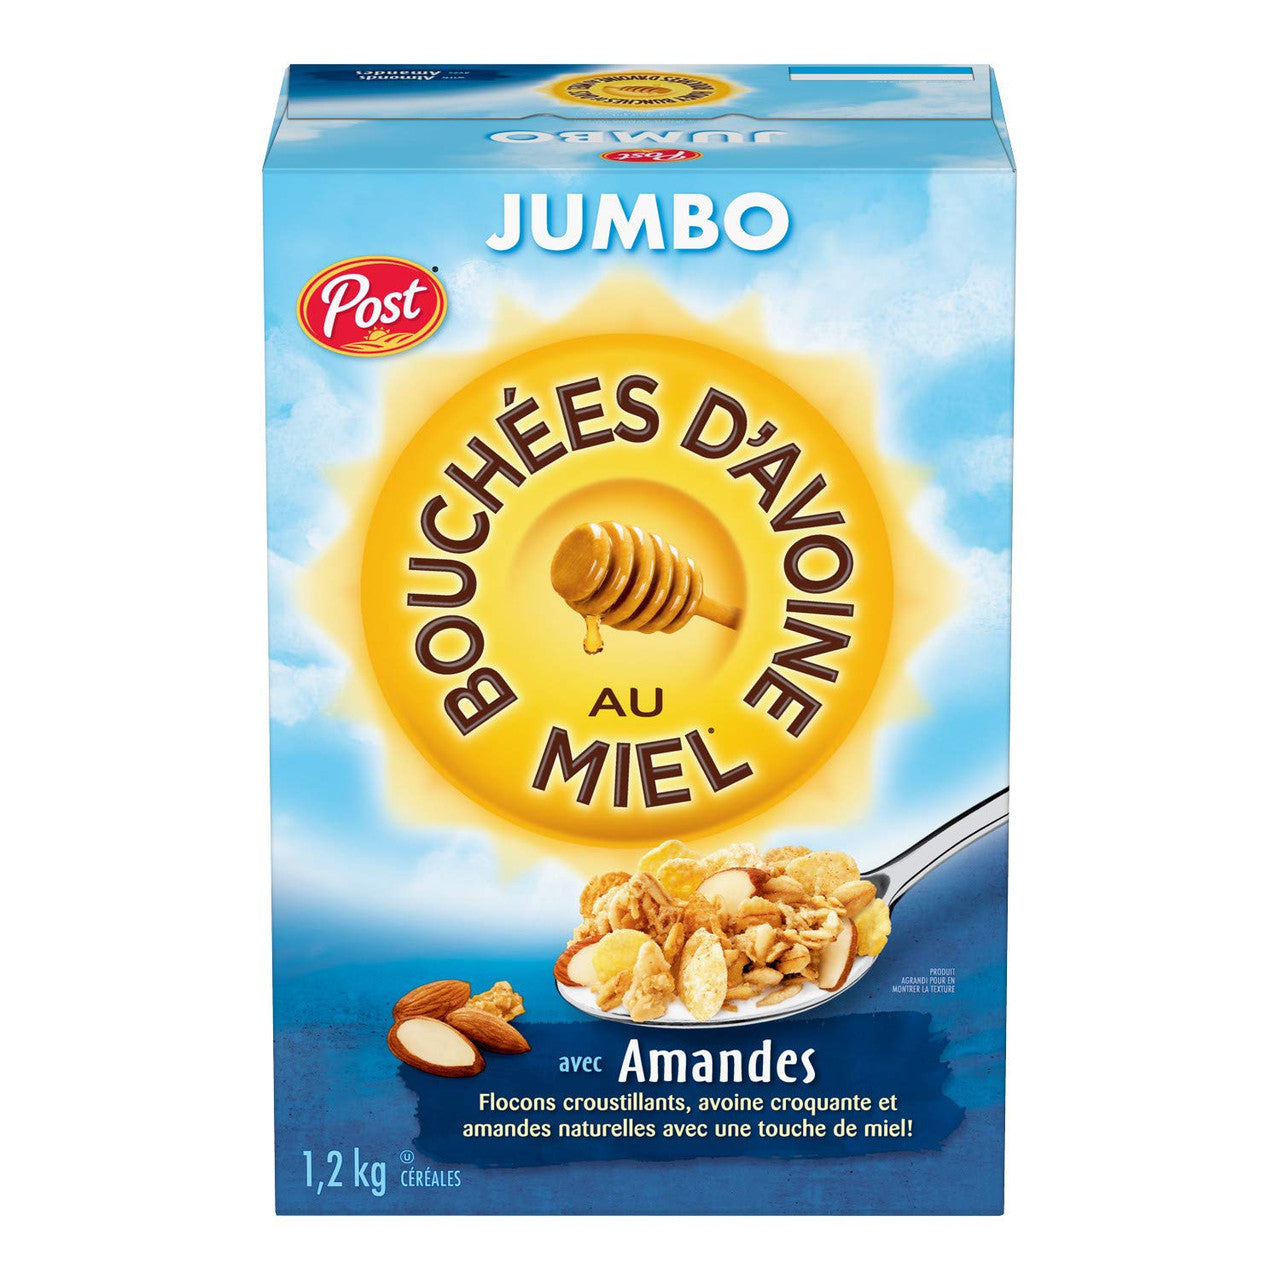 Post Jumbo Honey Bunches of Oats with Almonds, 1.2kg/2.6lbs., {Imported from Canada}